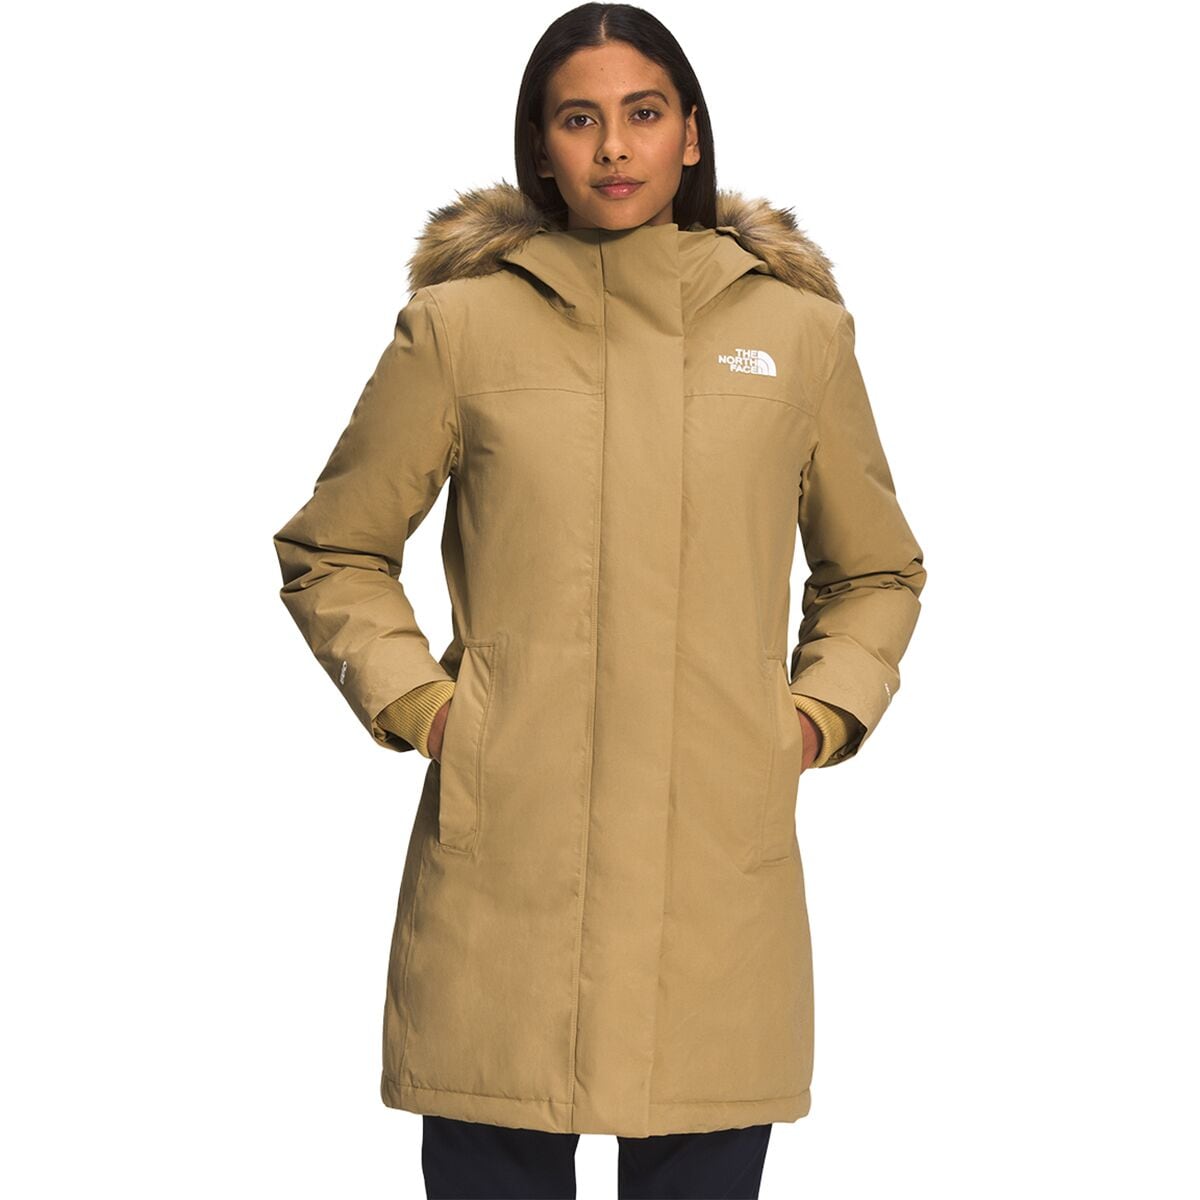 The North Face Arctic Down Parka - Women's - Clothing | Backcountry